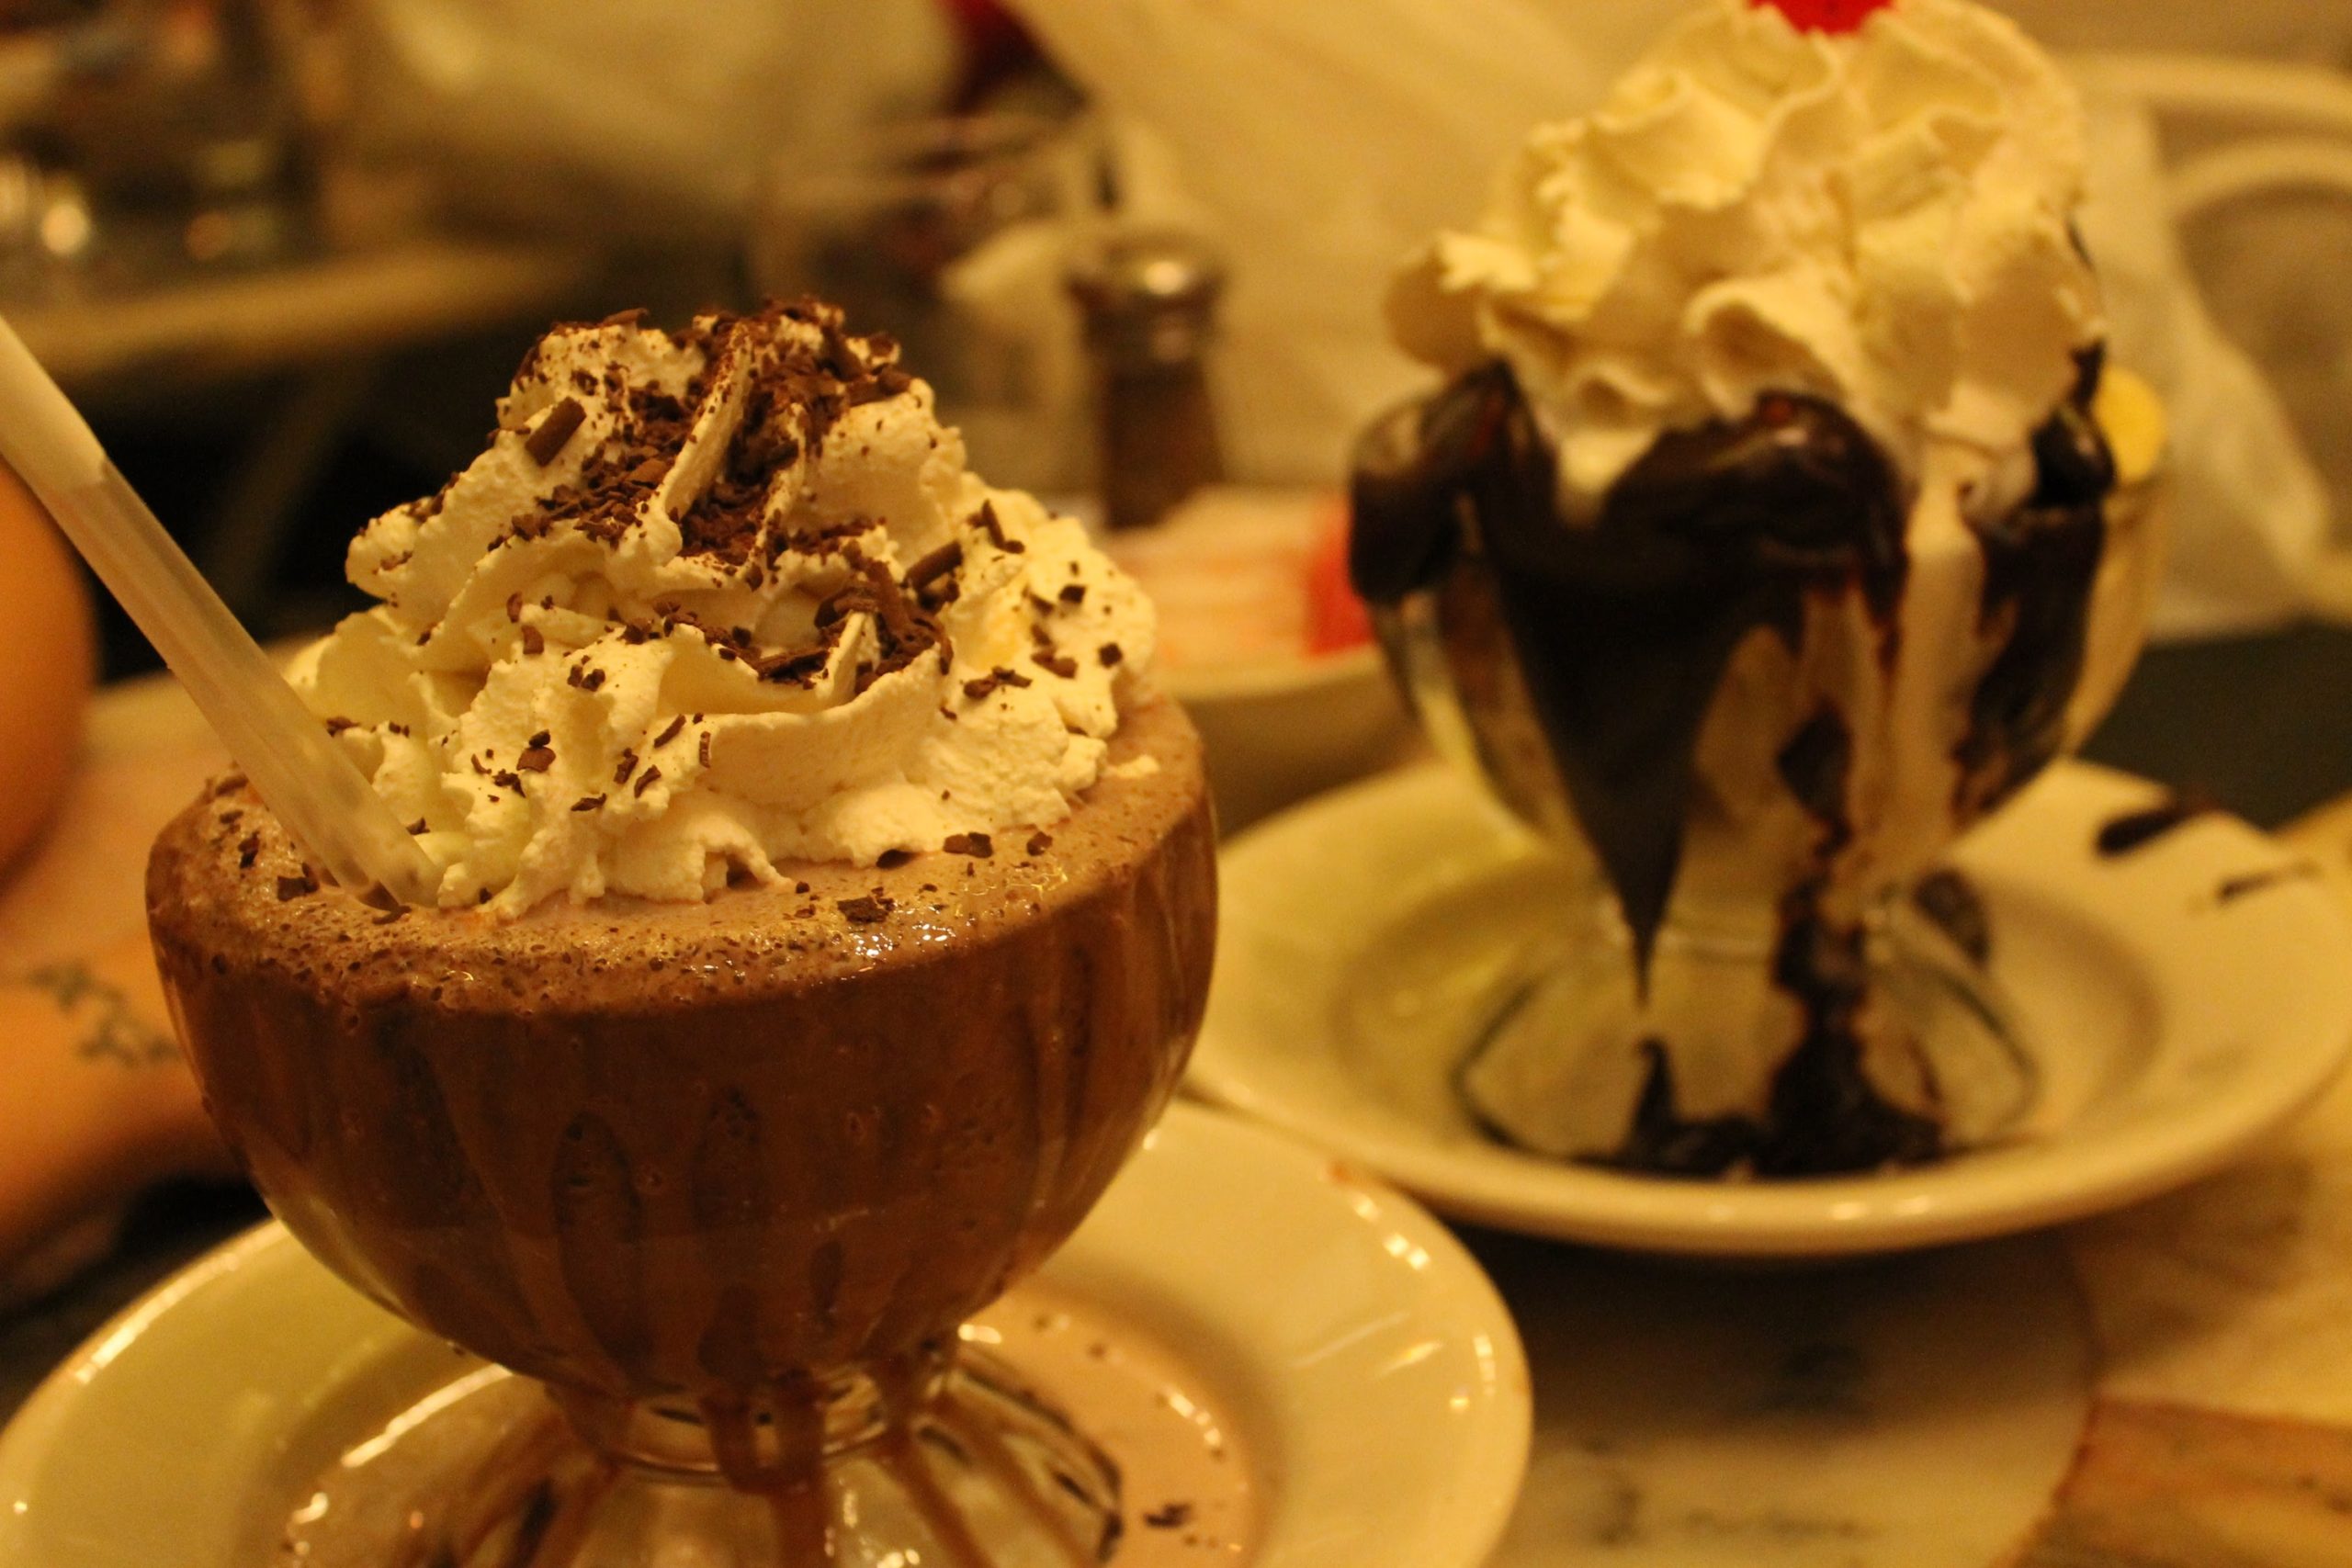 Frozen Hot Chocolate from Serendipity 3